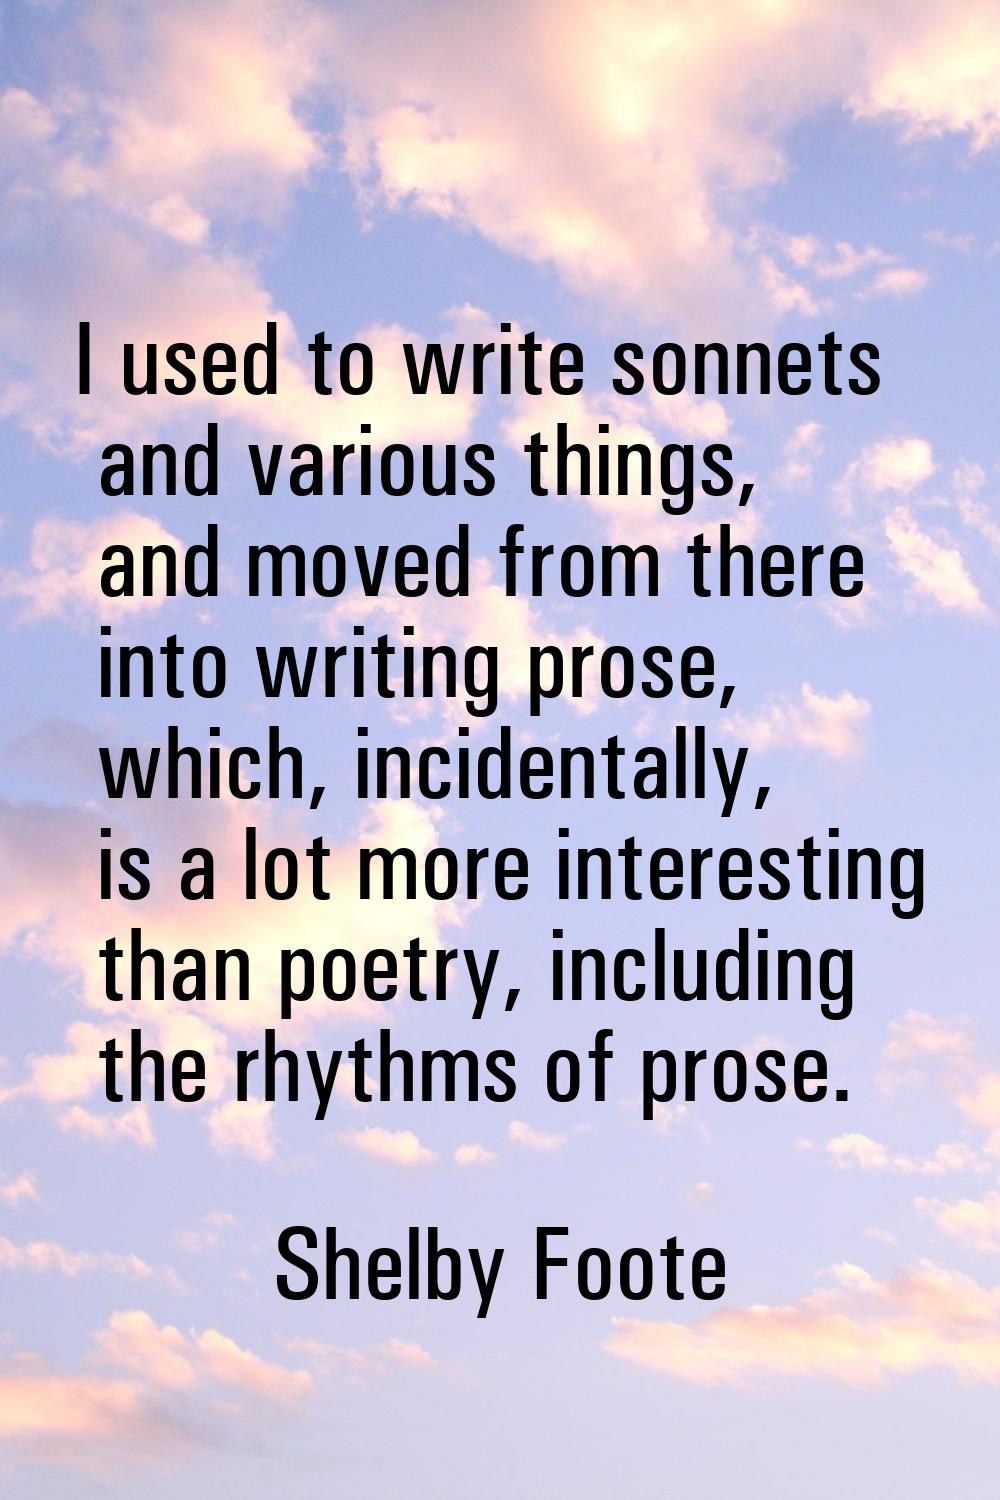 I used to write sonnets and various things, and moved from there into writing prose, which, inciden